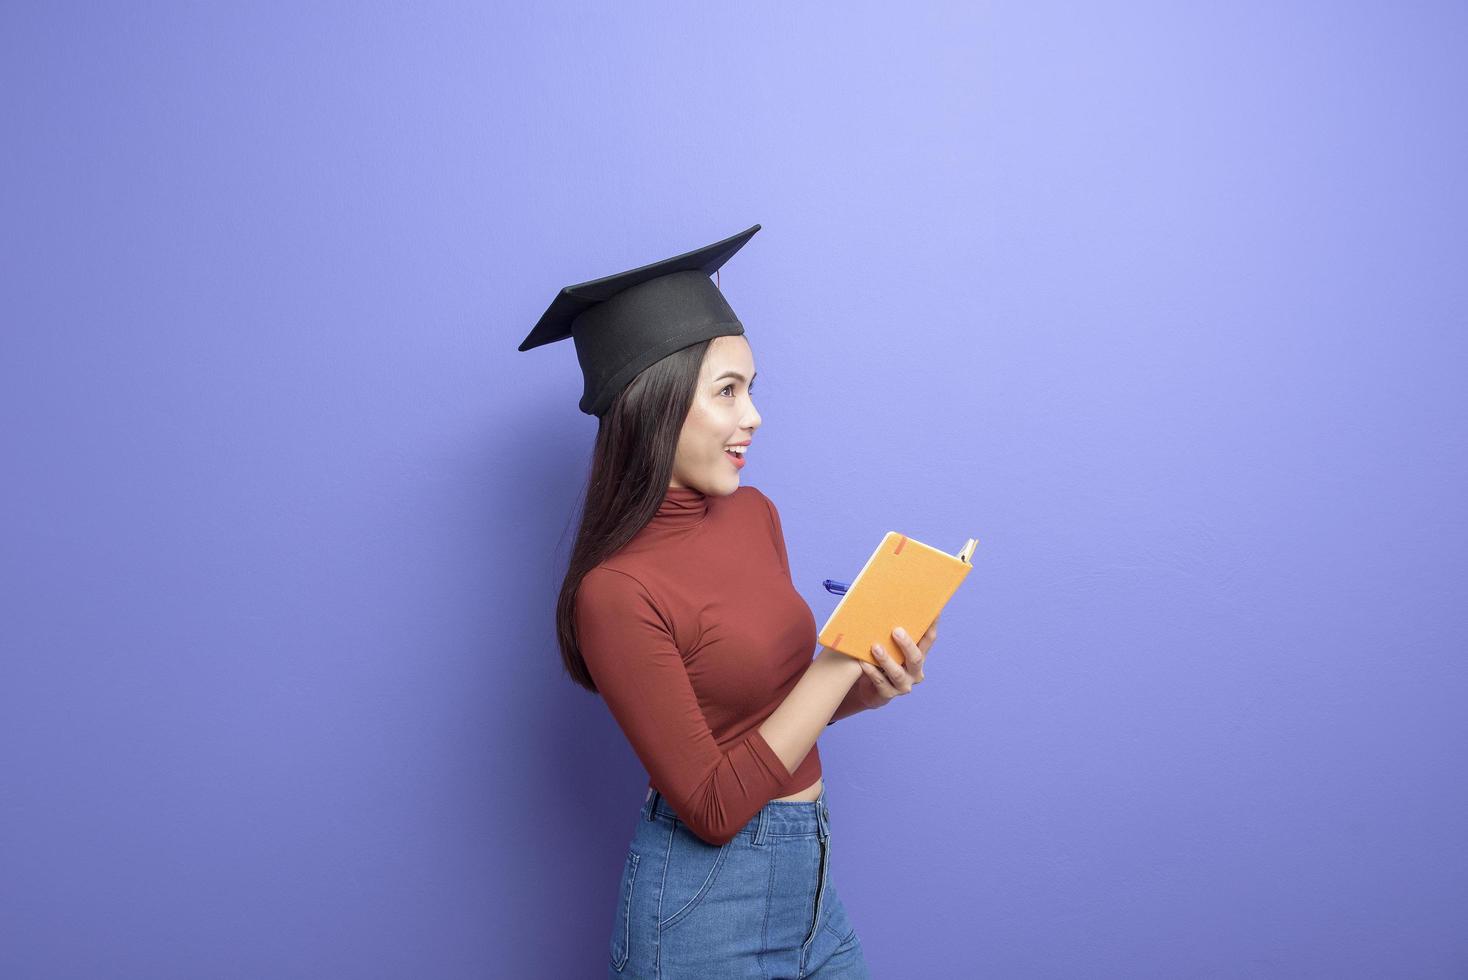 Portrait of young University student woman with graduation cap on violet background photo